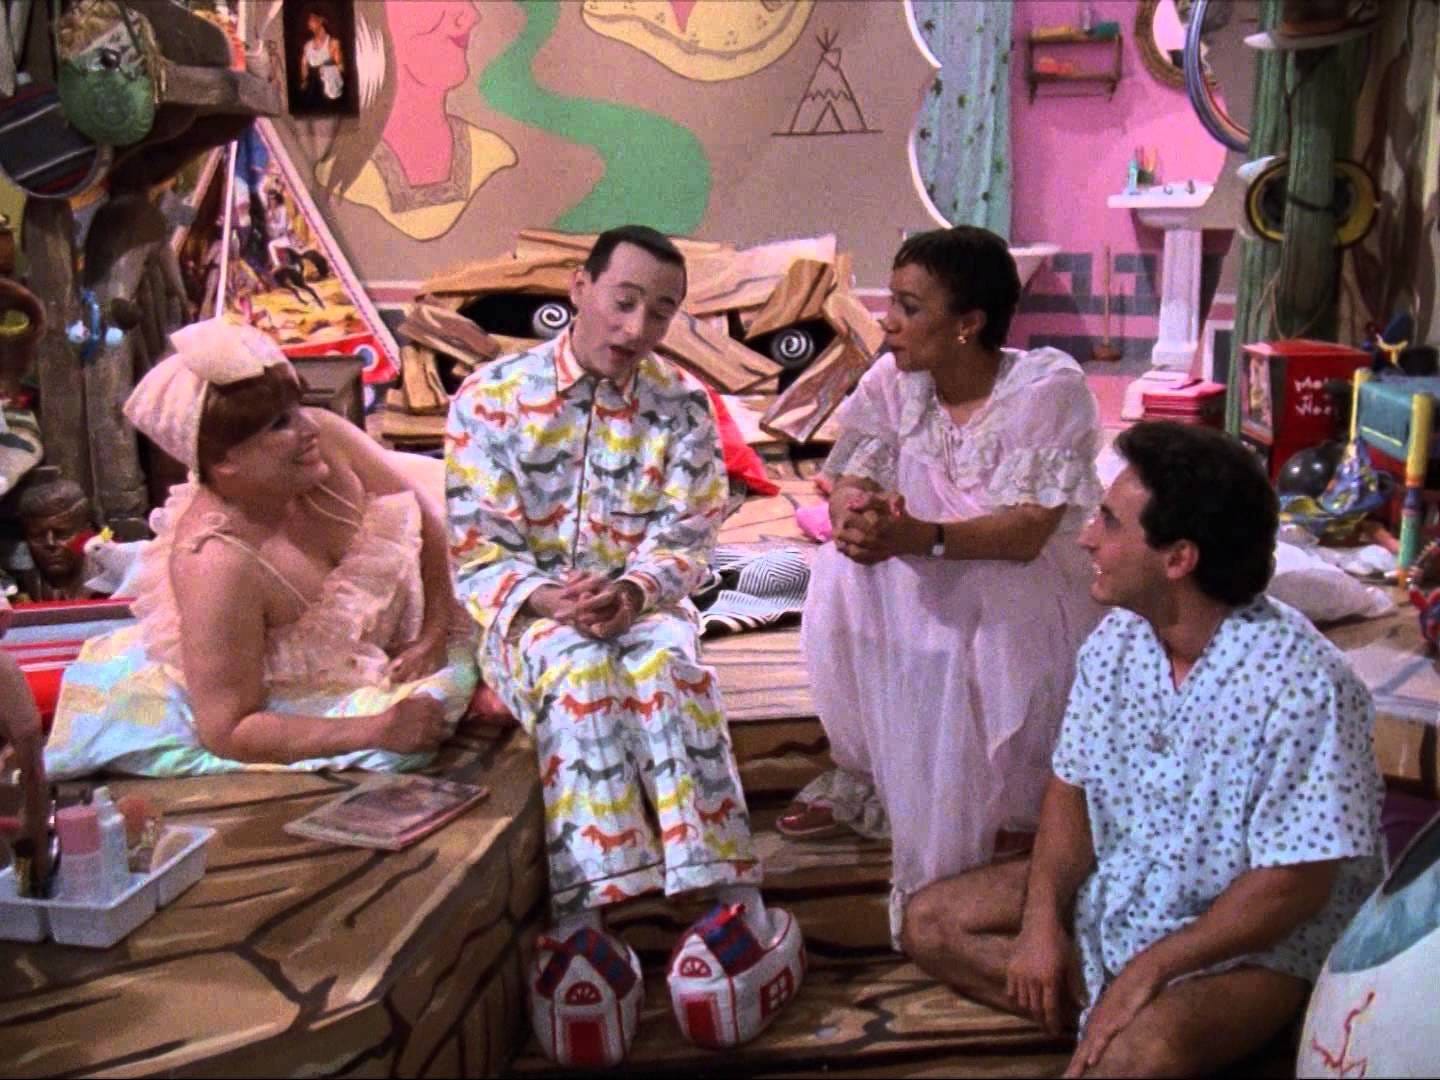 Still image from the TV show Pee-wee's Playhouse